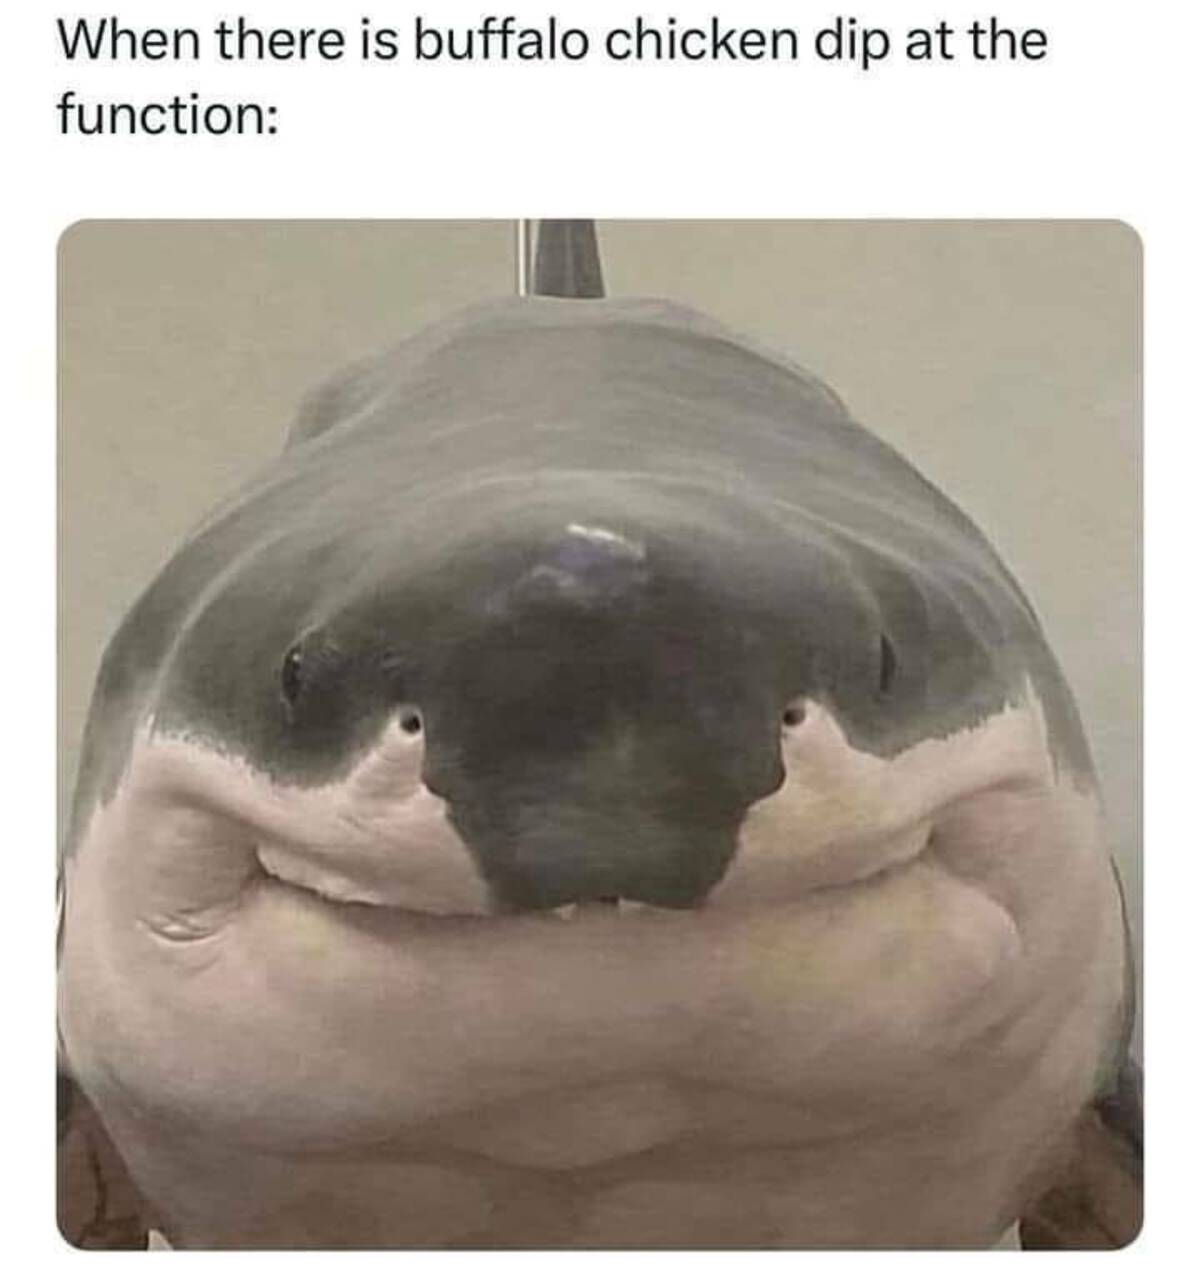 sharf shark - When there is buffalo chicken dip at the function